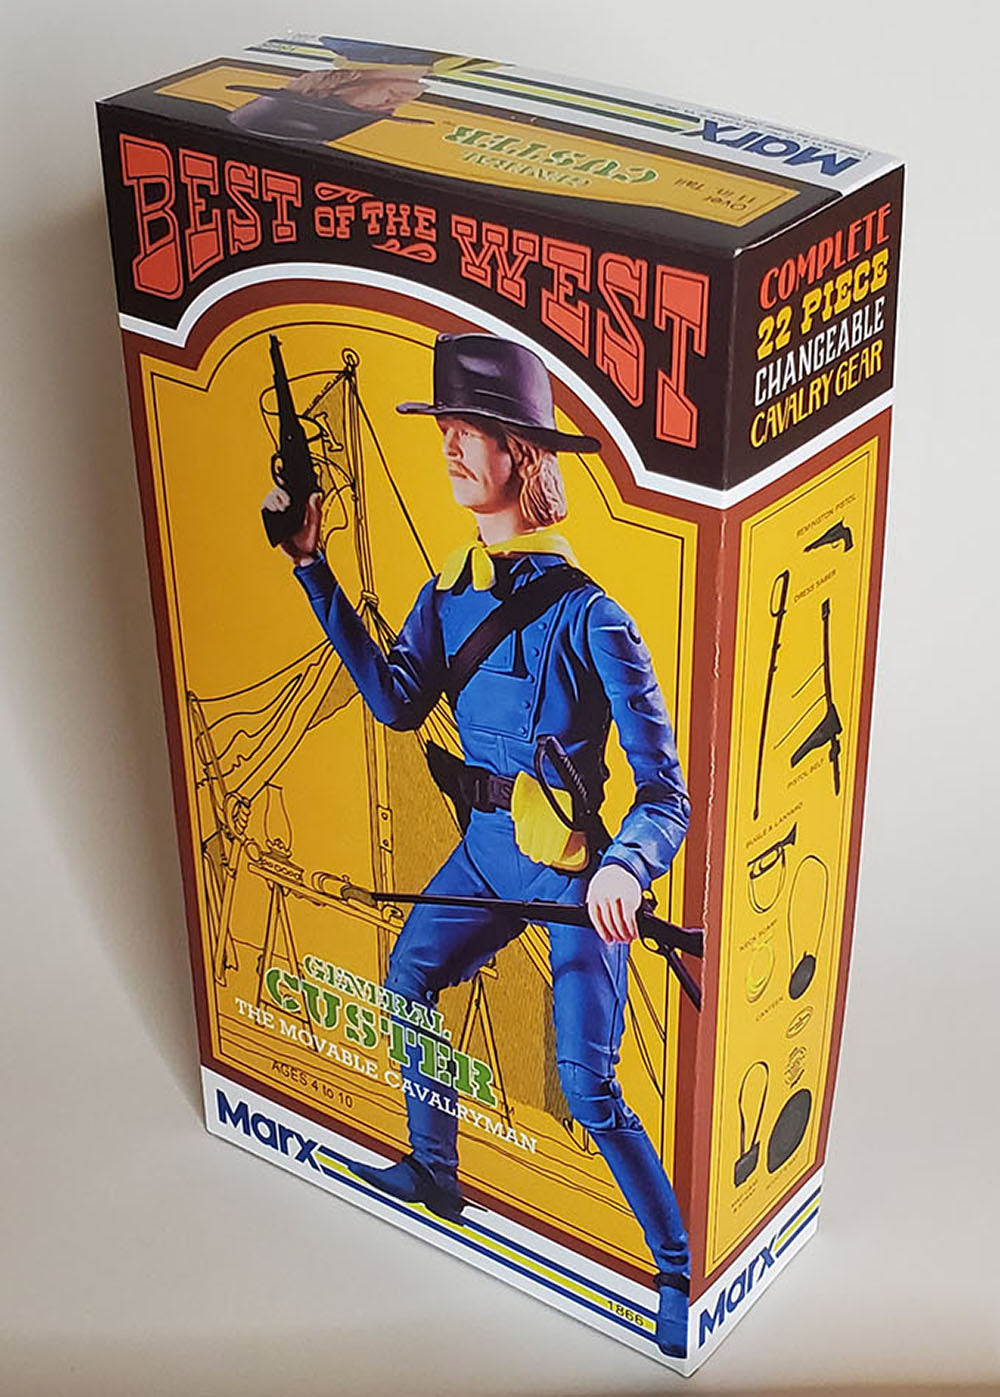 BOTW - General Custer – 1st Edition Reproduction Box (and Manual)